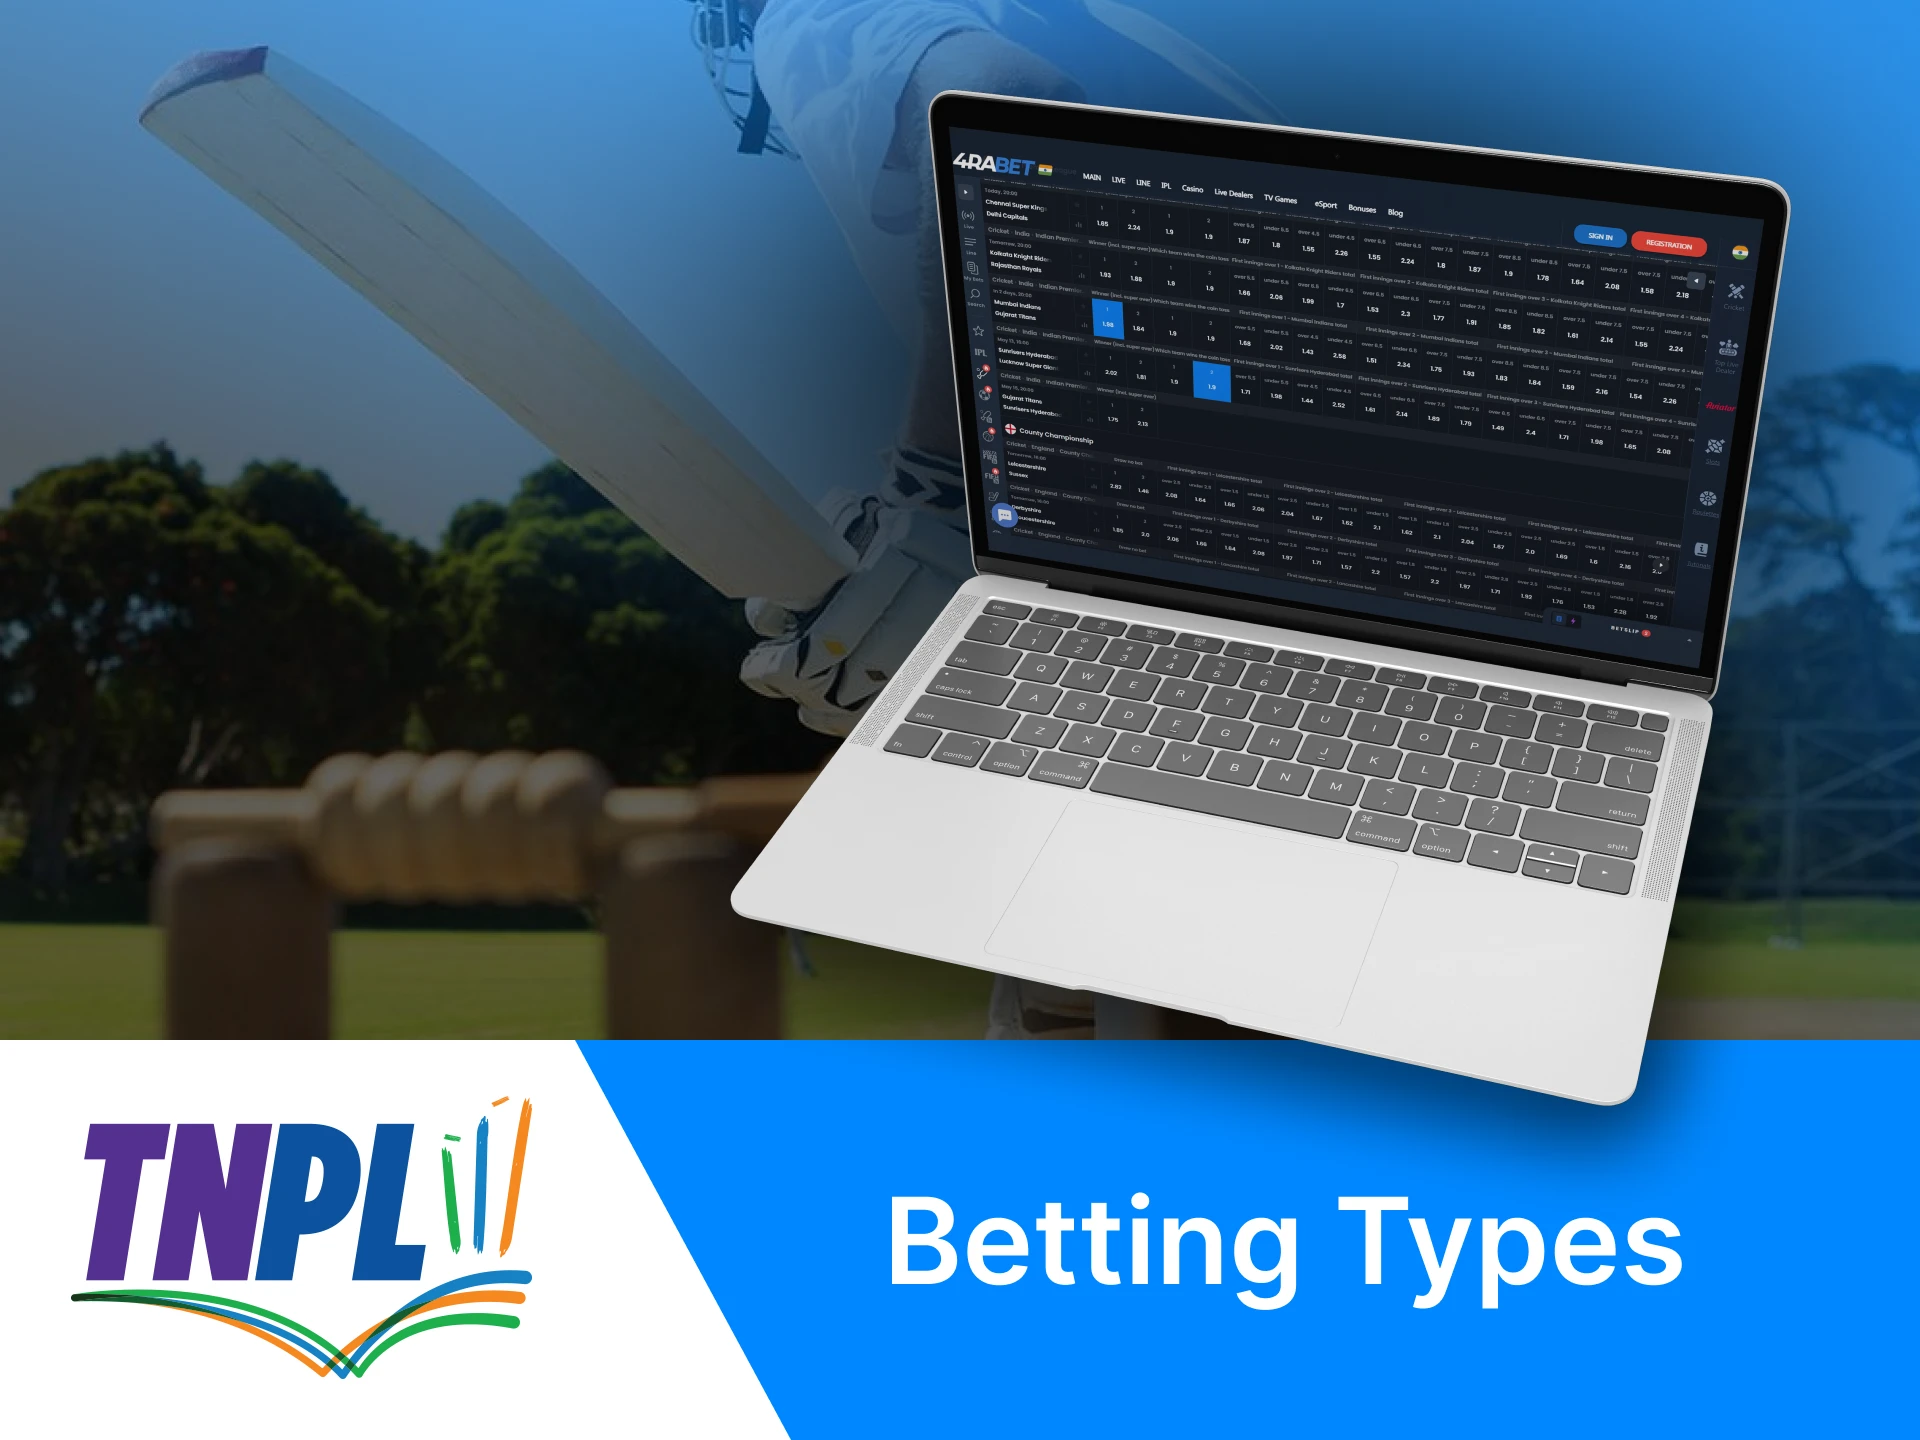 You can place different types of bets for TNPL on betting sites.